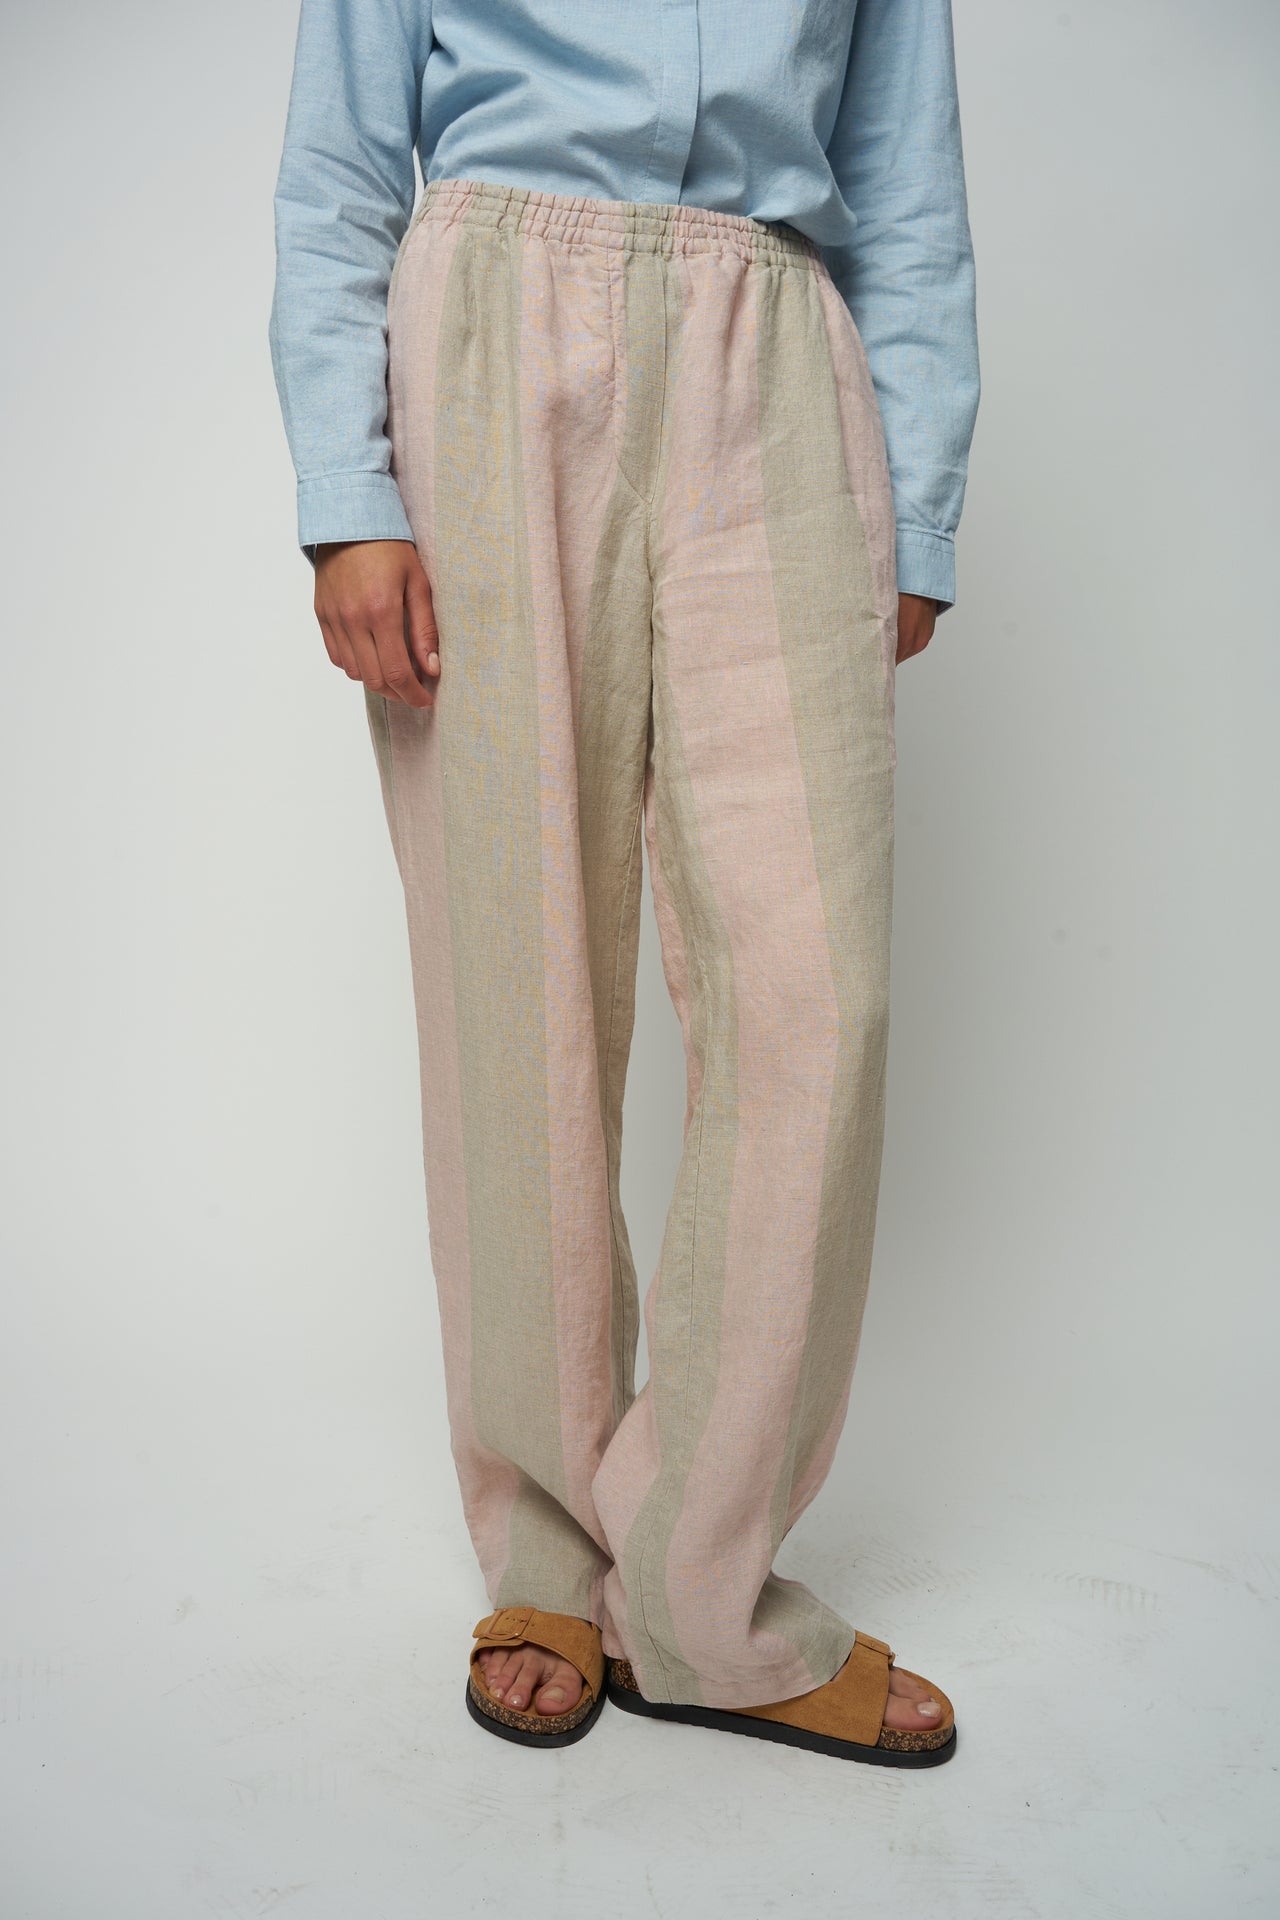 Pants in Tonal Pink and Beige Stripes of a Superb Italian Traceable Linen